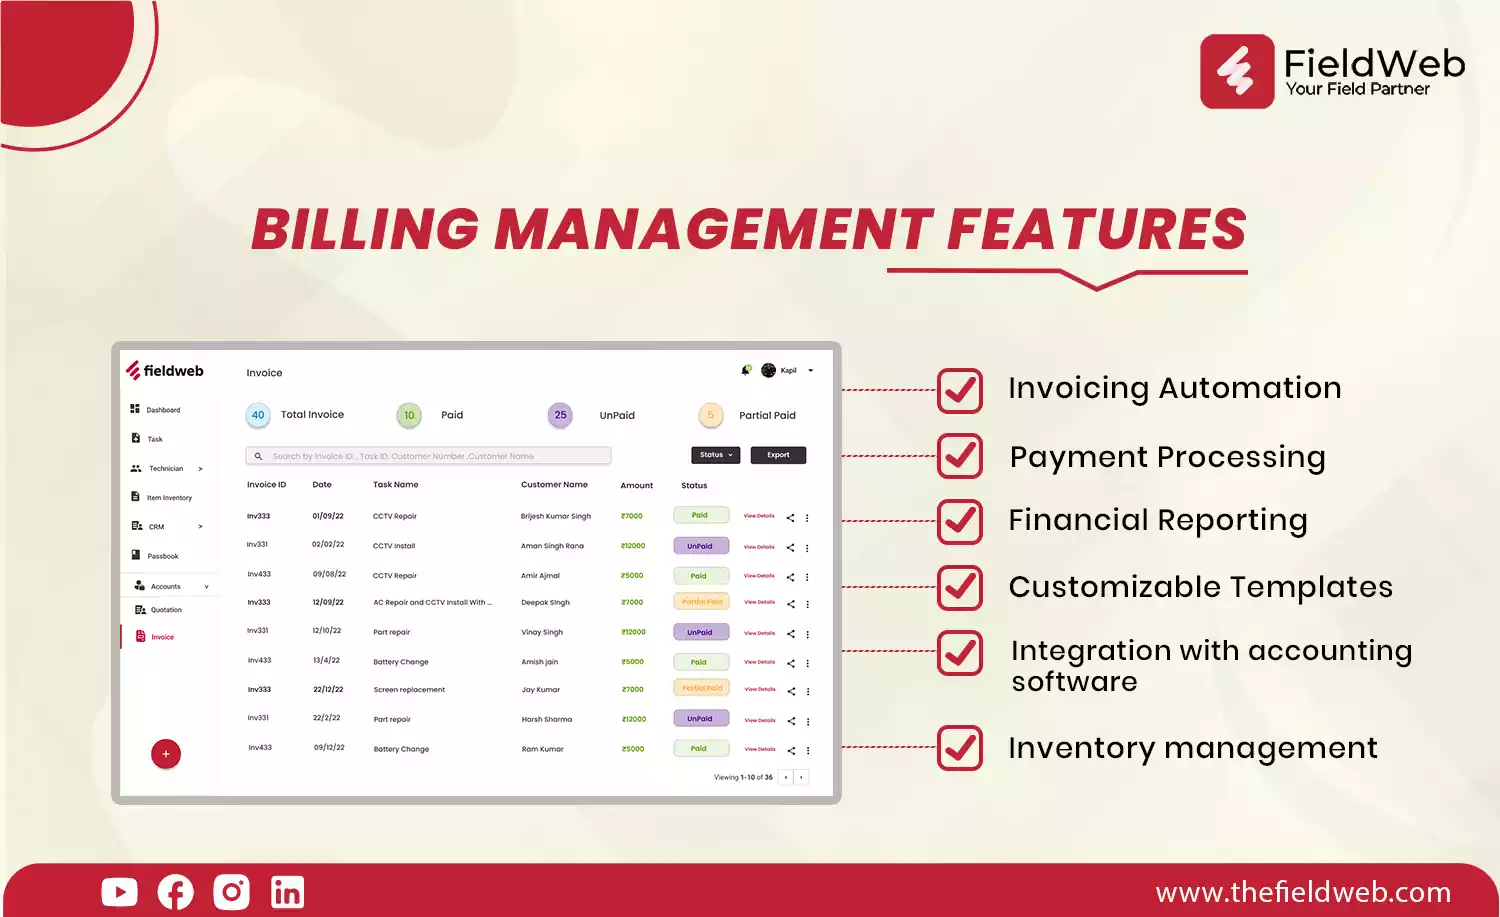 image is displaying 6 features of billing management software